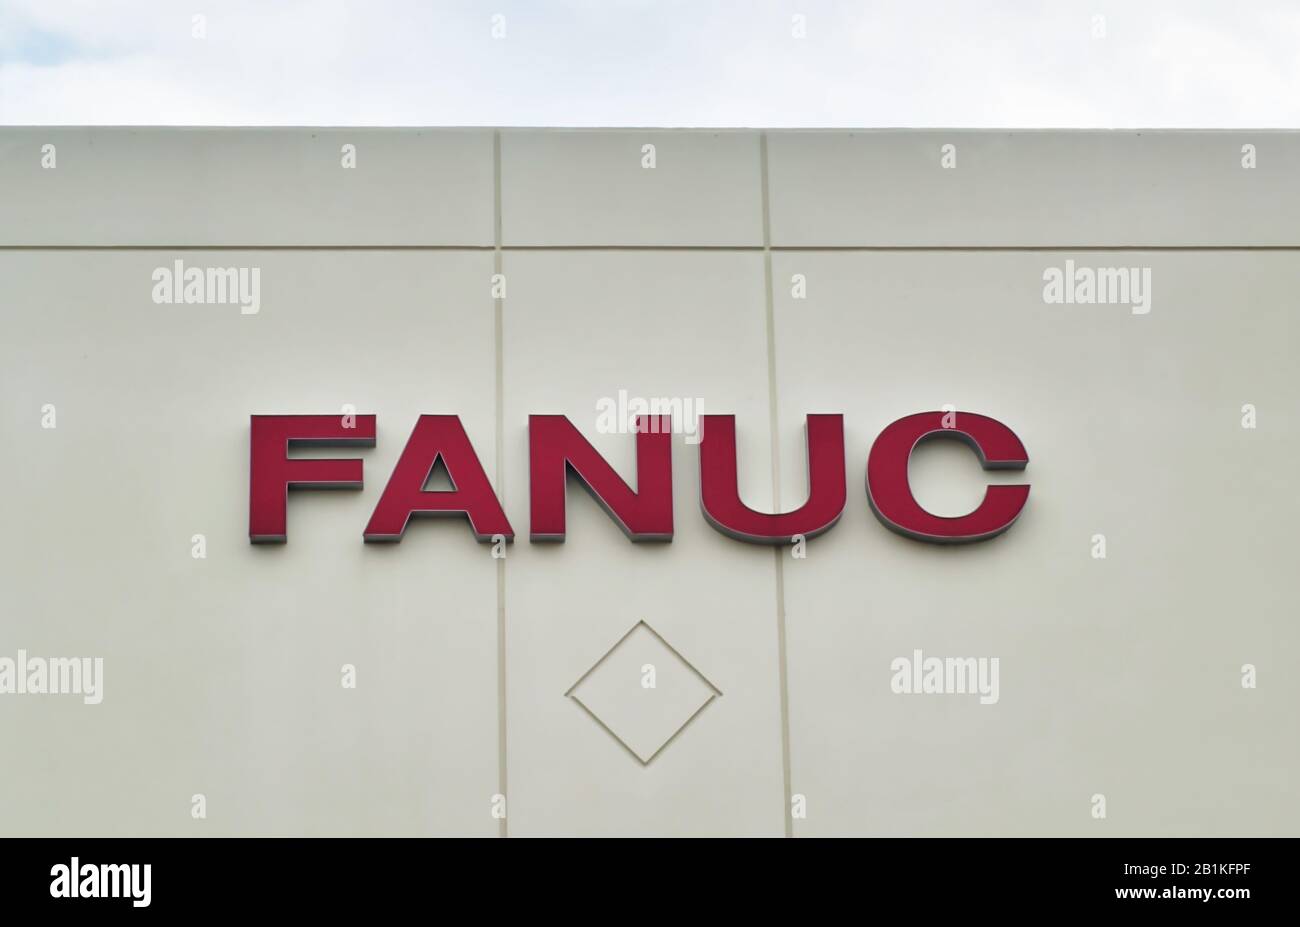 FANUC Corporation office building wall sign in Houston, TX. The largest supplier of industrial automation robotics in the world, founded in 1958. Stock Photo